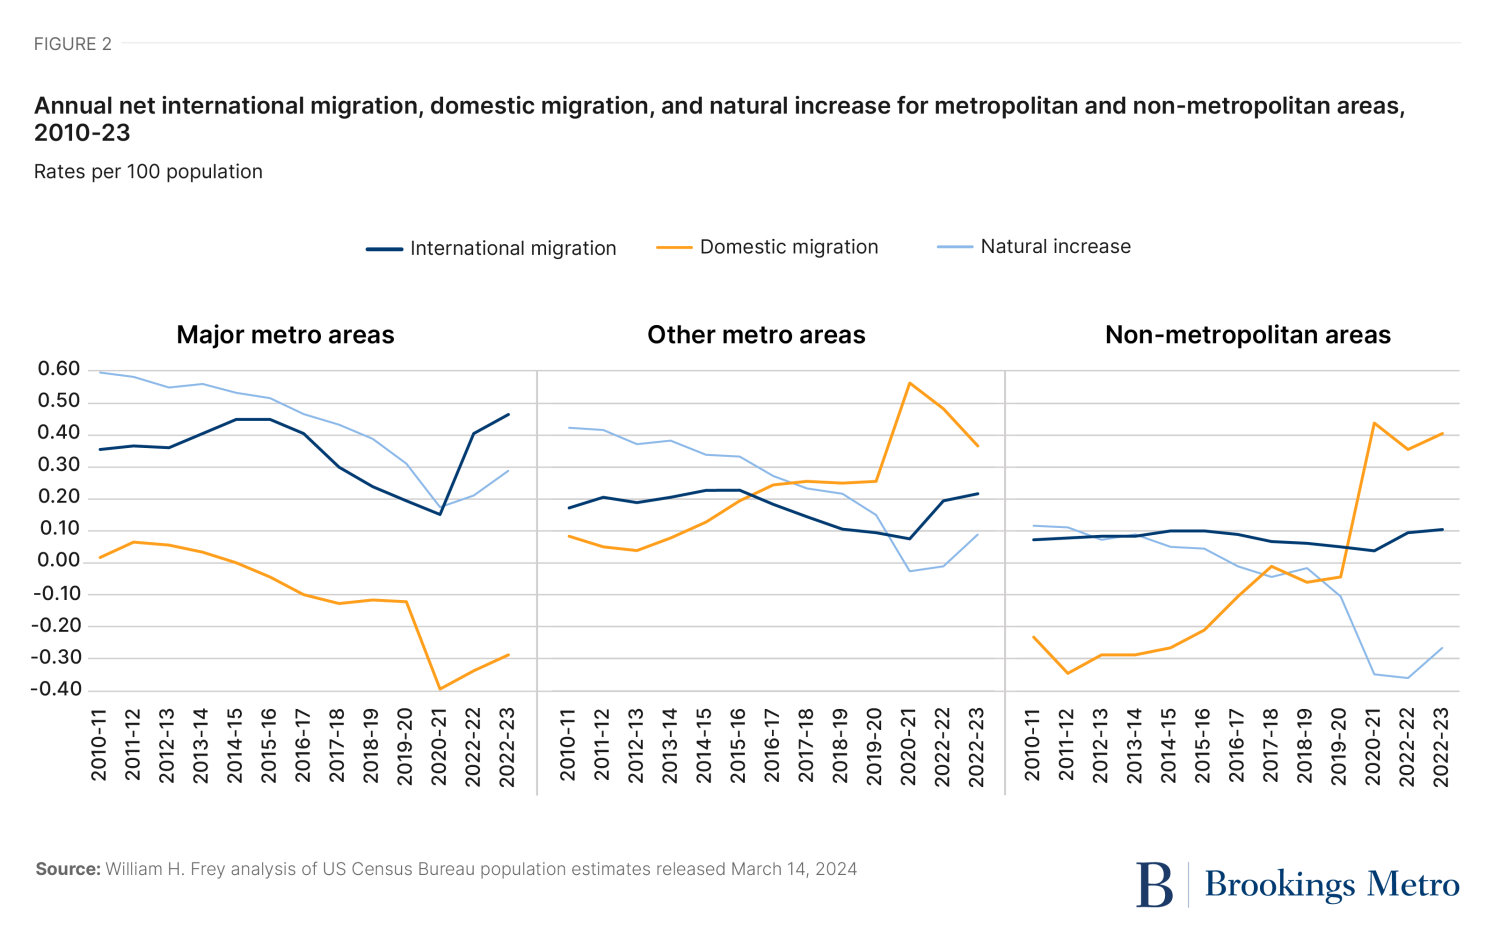 Figure 2. Annual Net Domestic Migration, International Migration and Natural Increase for Metropolitan and Non-metropolitan areas 2010-2023